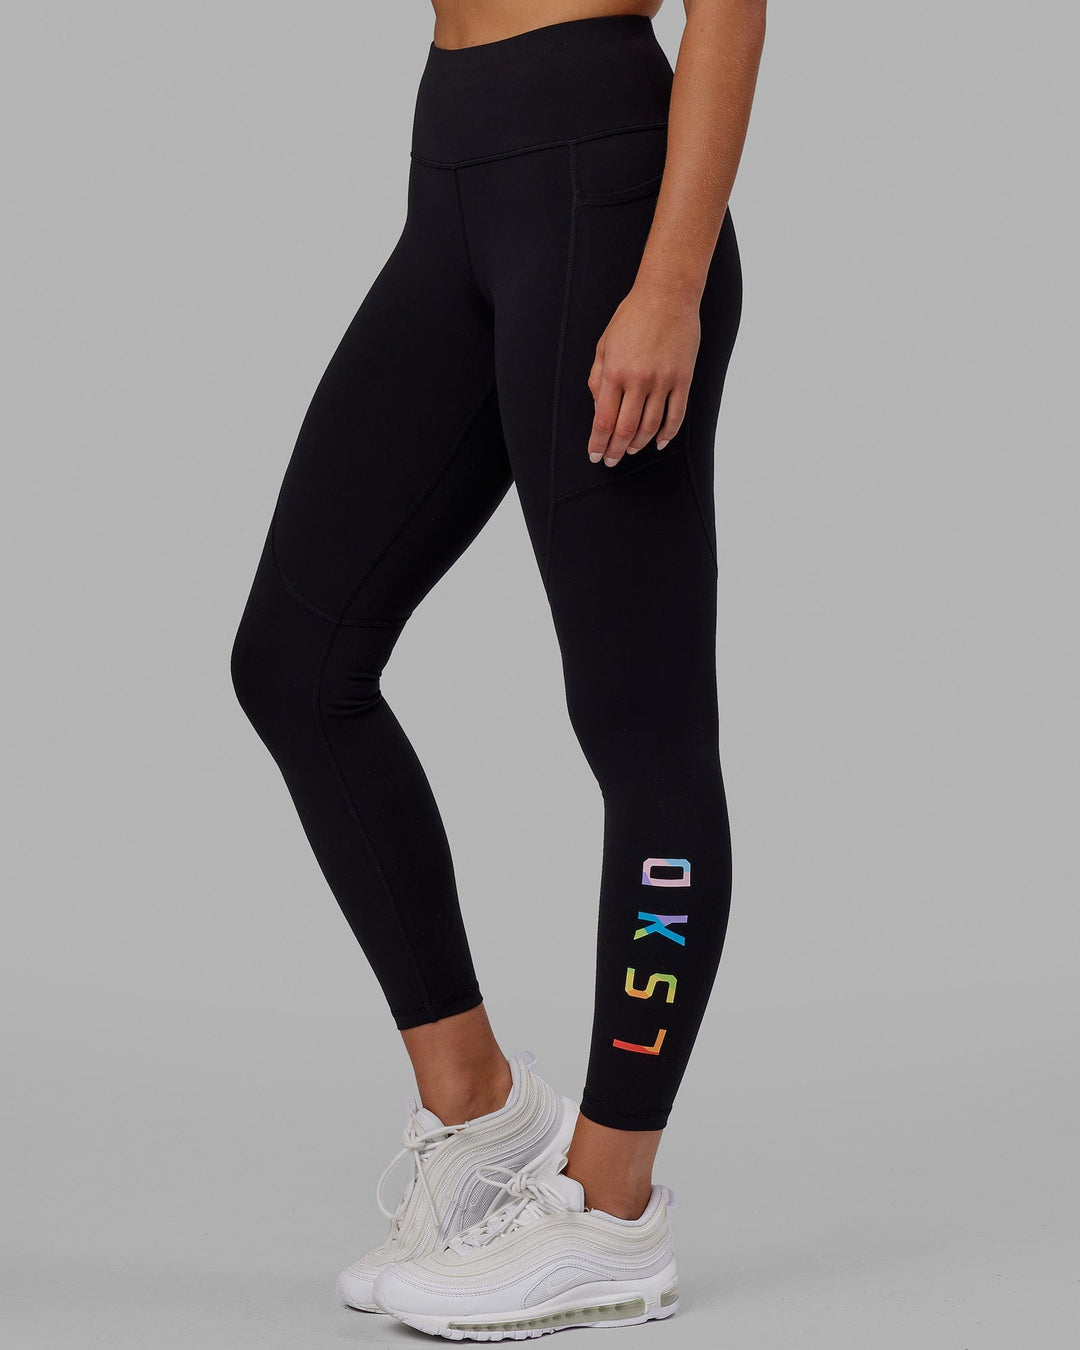 LSKD - The most versatile tights 🚨 Over 260 reviews on this style 🔥 +  More colour-ways than one 🤯 lskd.co/collections/womens-sport